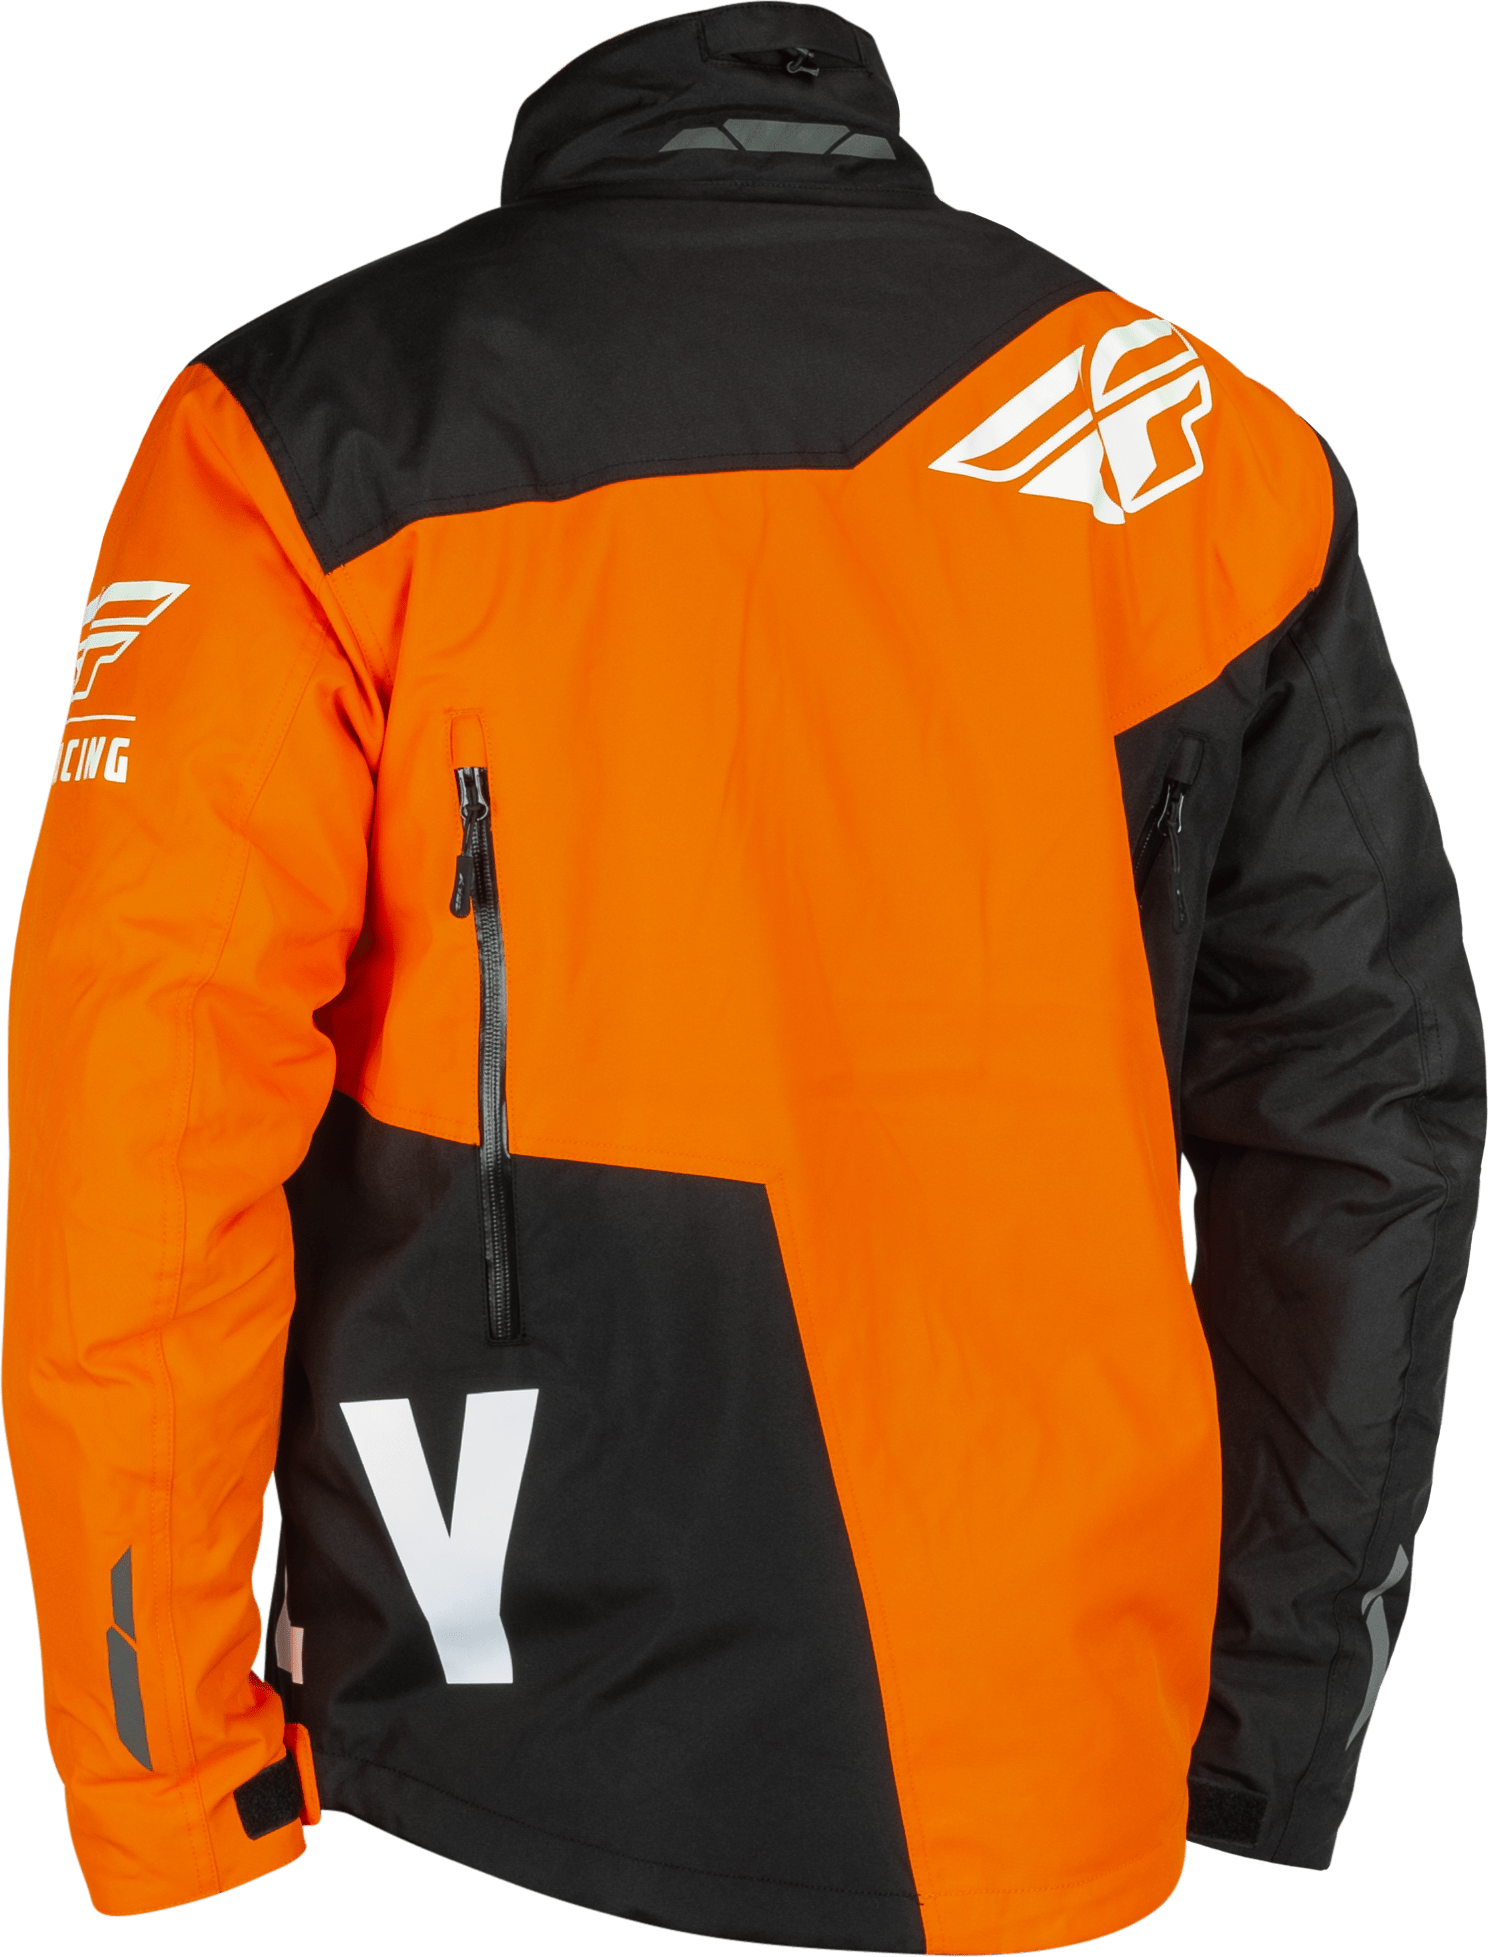 Western Powersports Jacket Youth Snx Pro Jacket By Fly Racing